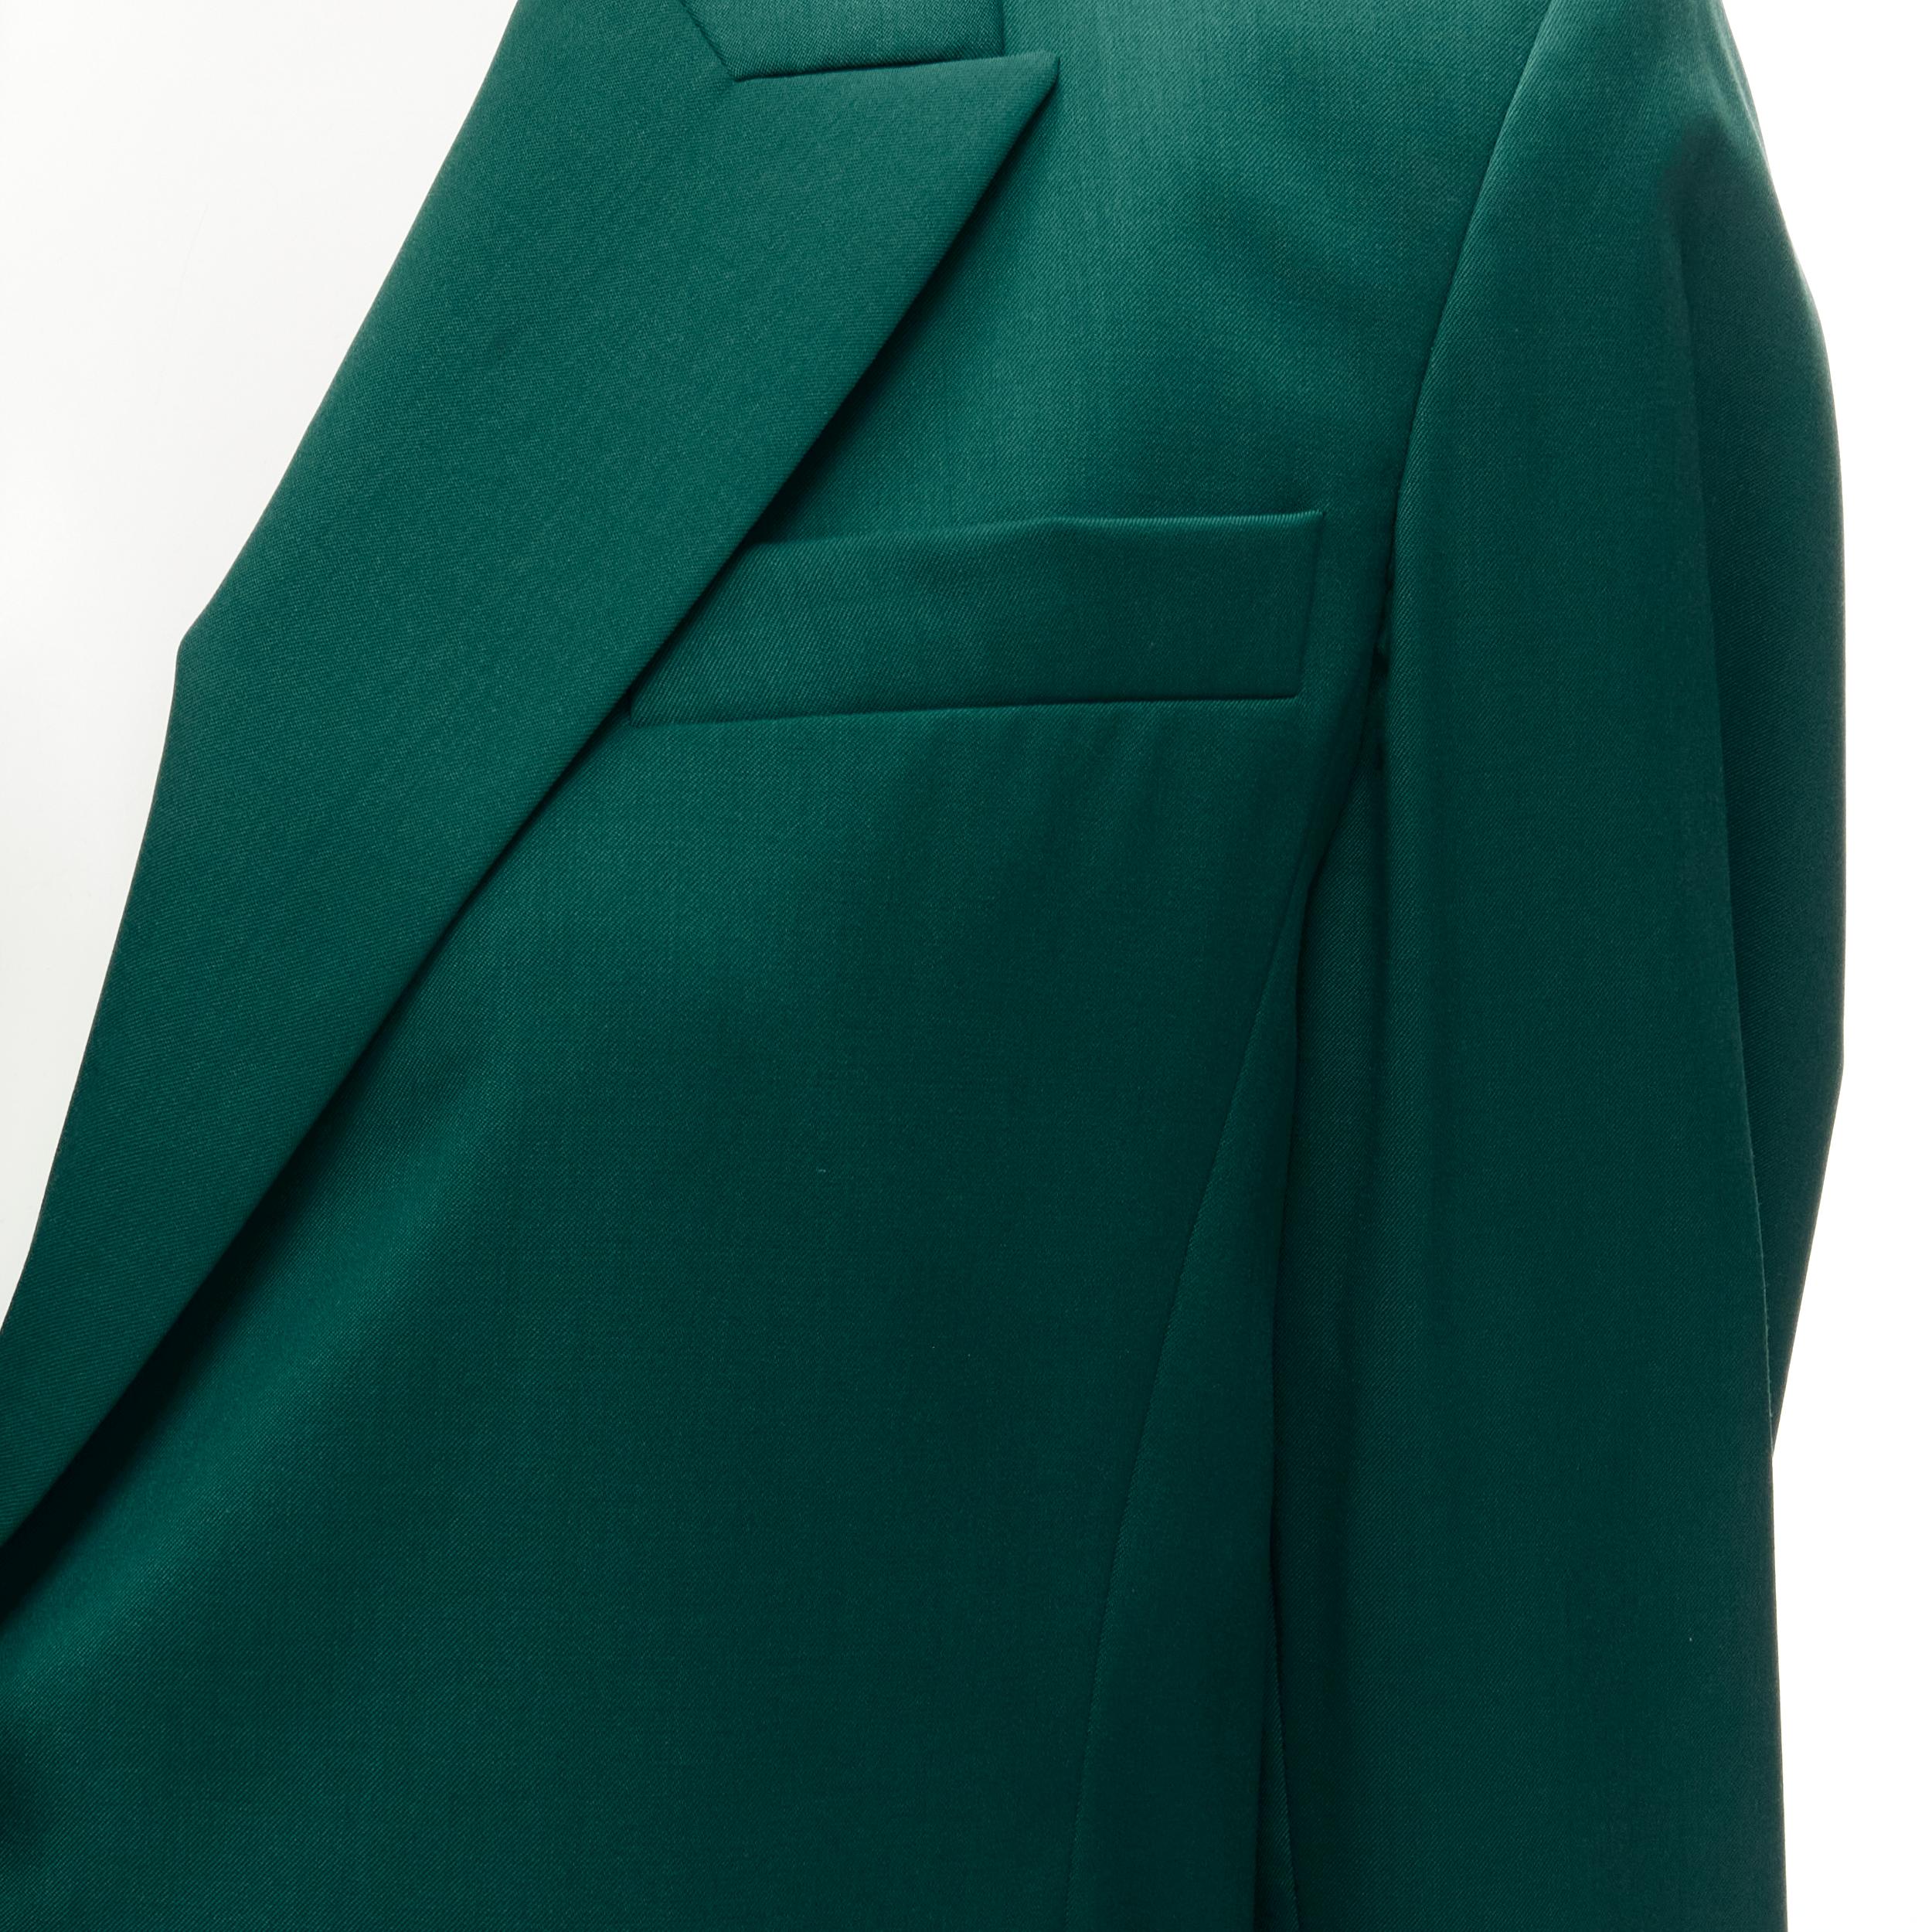 RYAN ROCHE 100% wool green peal lapel single button blazer jacket US2 XS 
Reference: JACG/A00042 
Brand: Ryan Roche 
Material: Wool 
Color: Green 
Pattern: Solid 
Closure: Button 
Extra Detail: Padded shoulders. Peak lapel. Single buttons. Slit